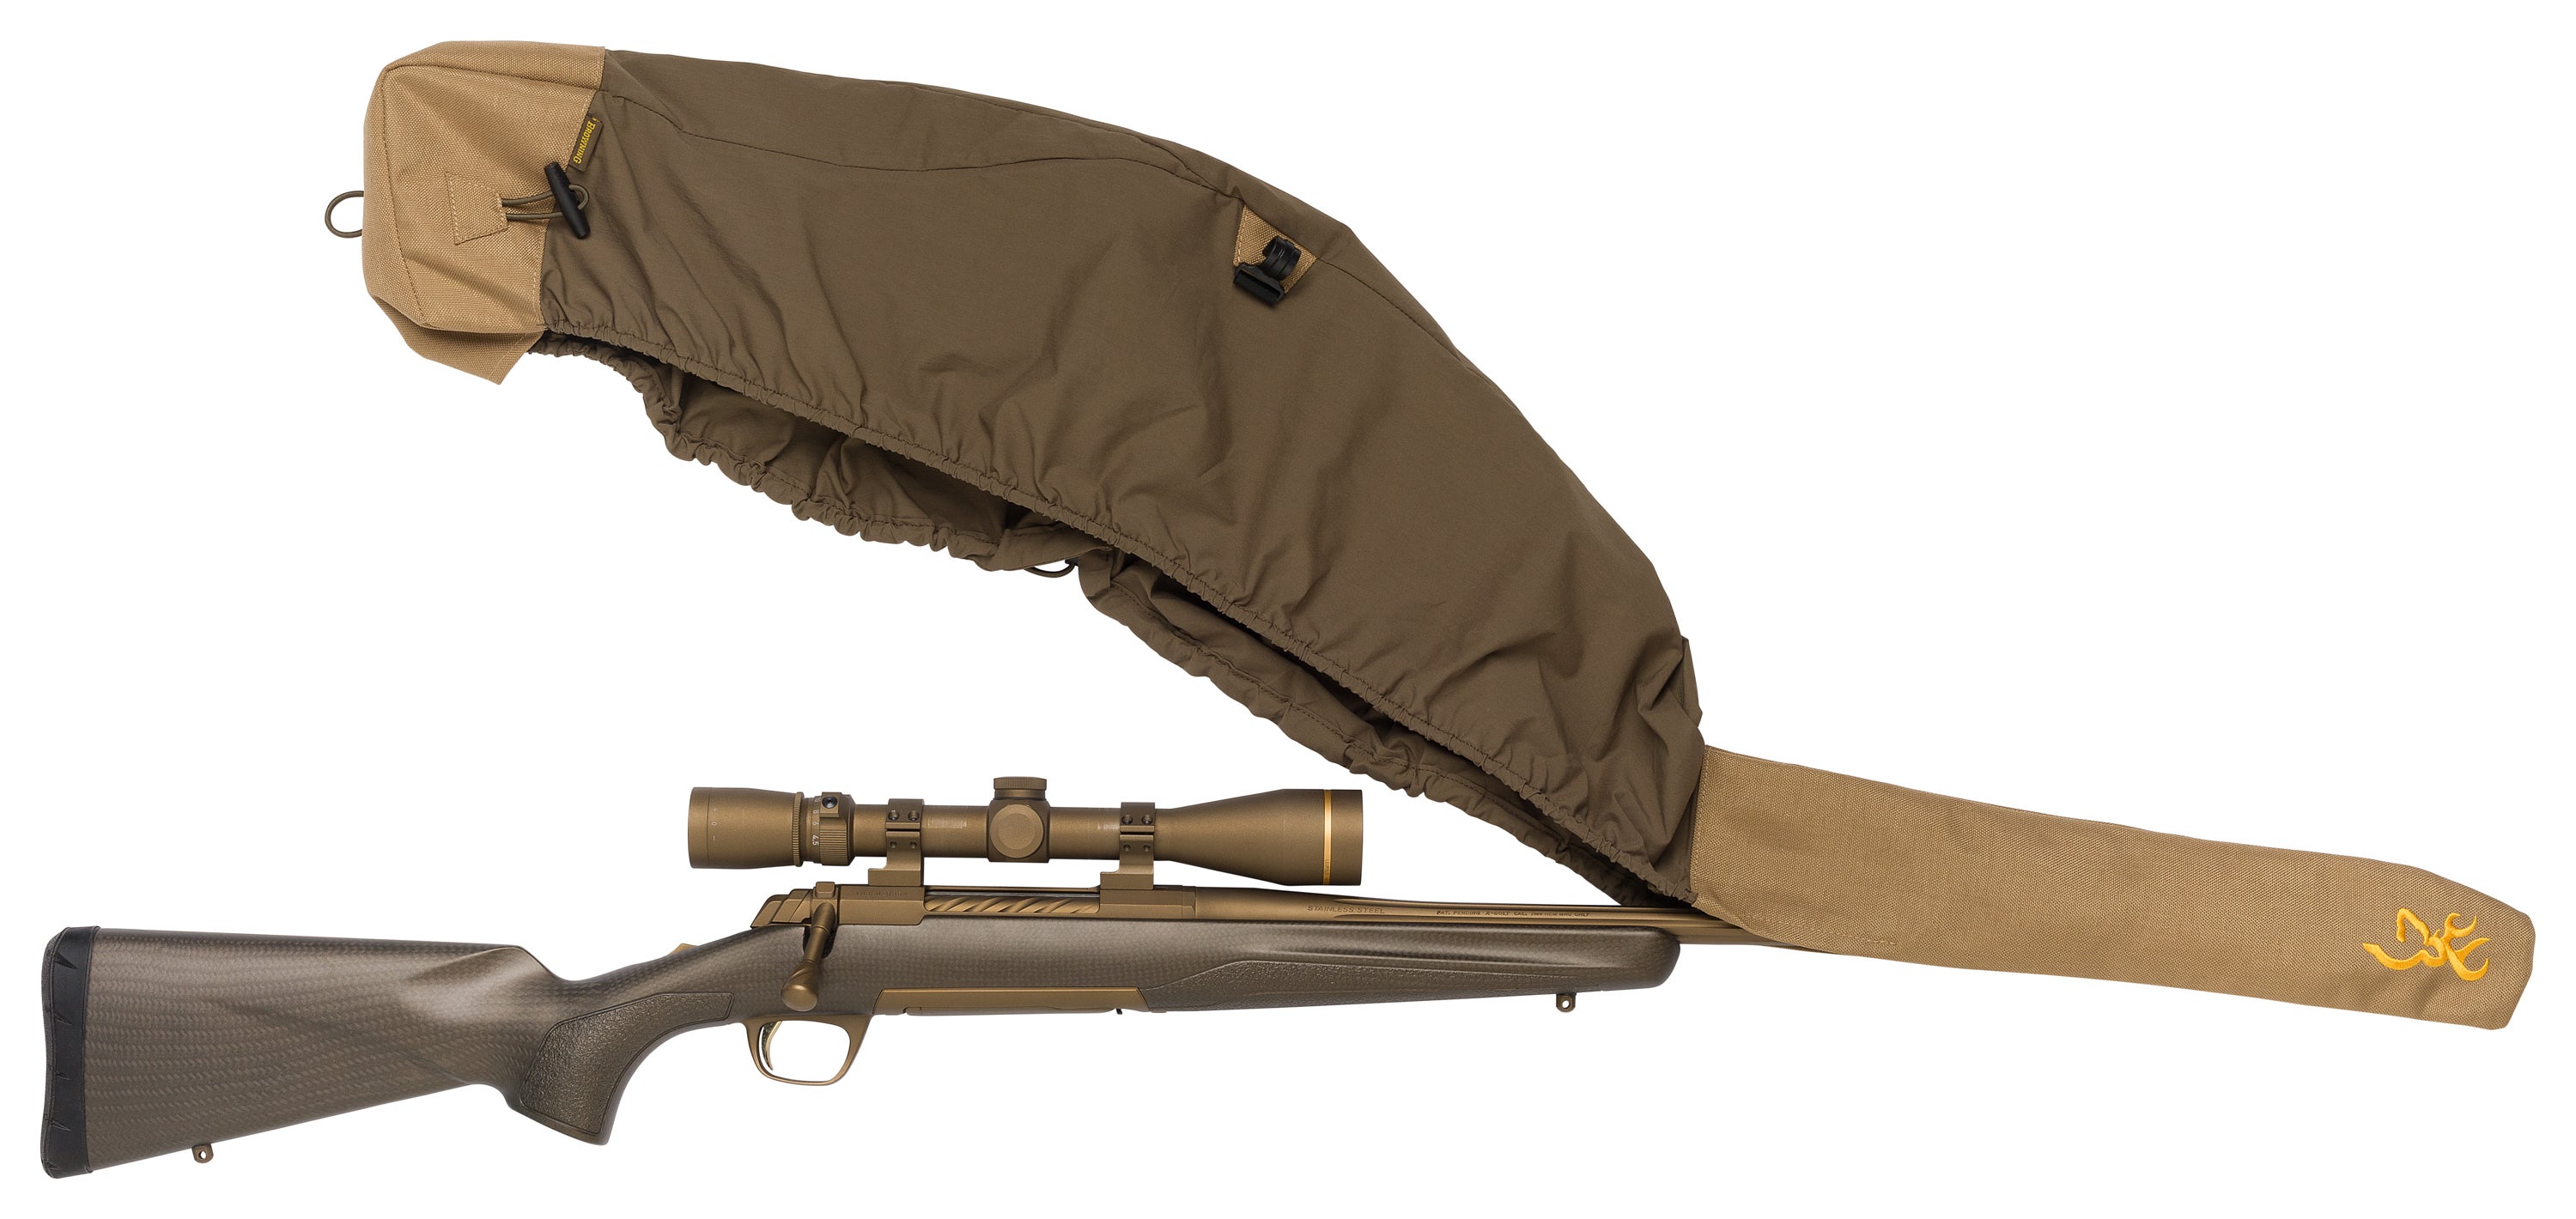 Backcountry Rifle Cover - Browning